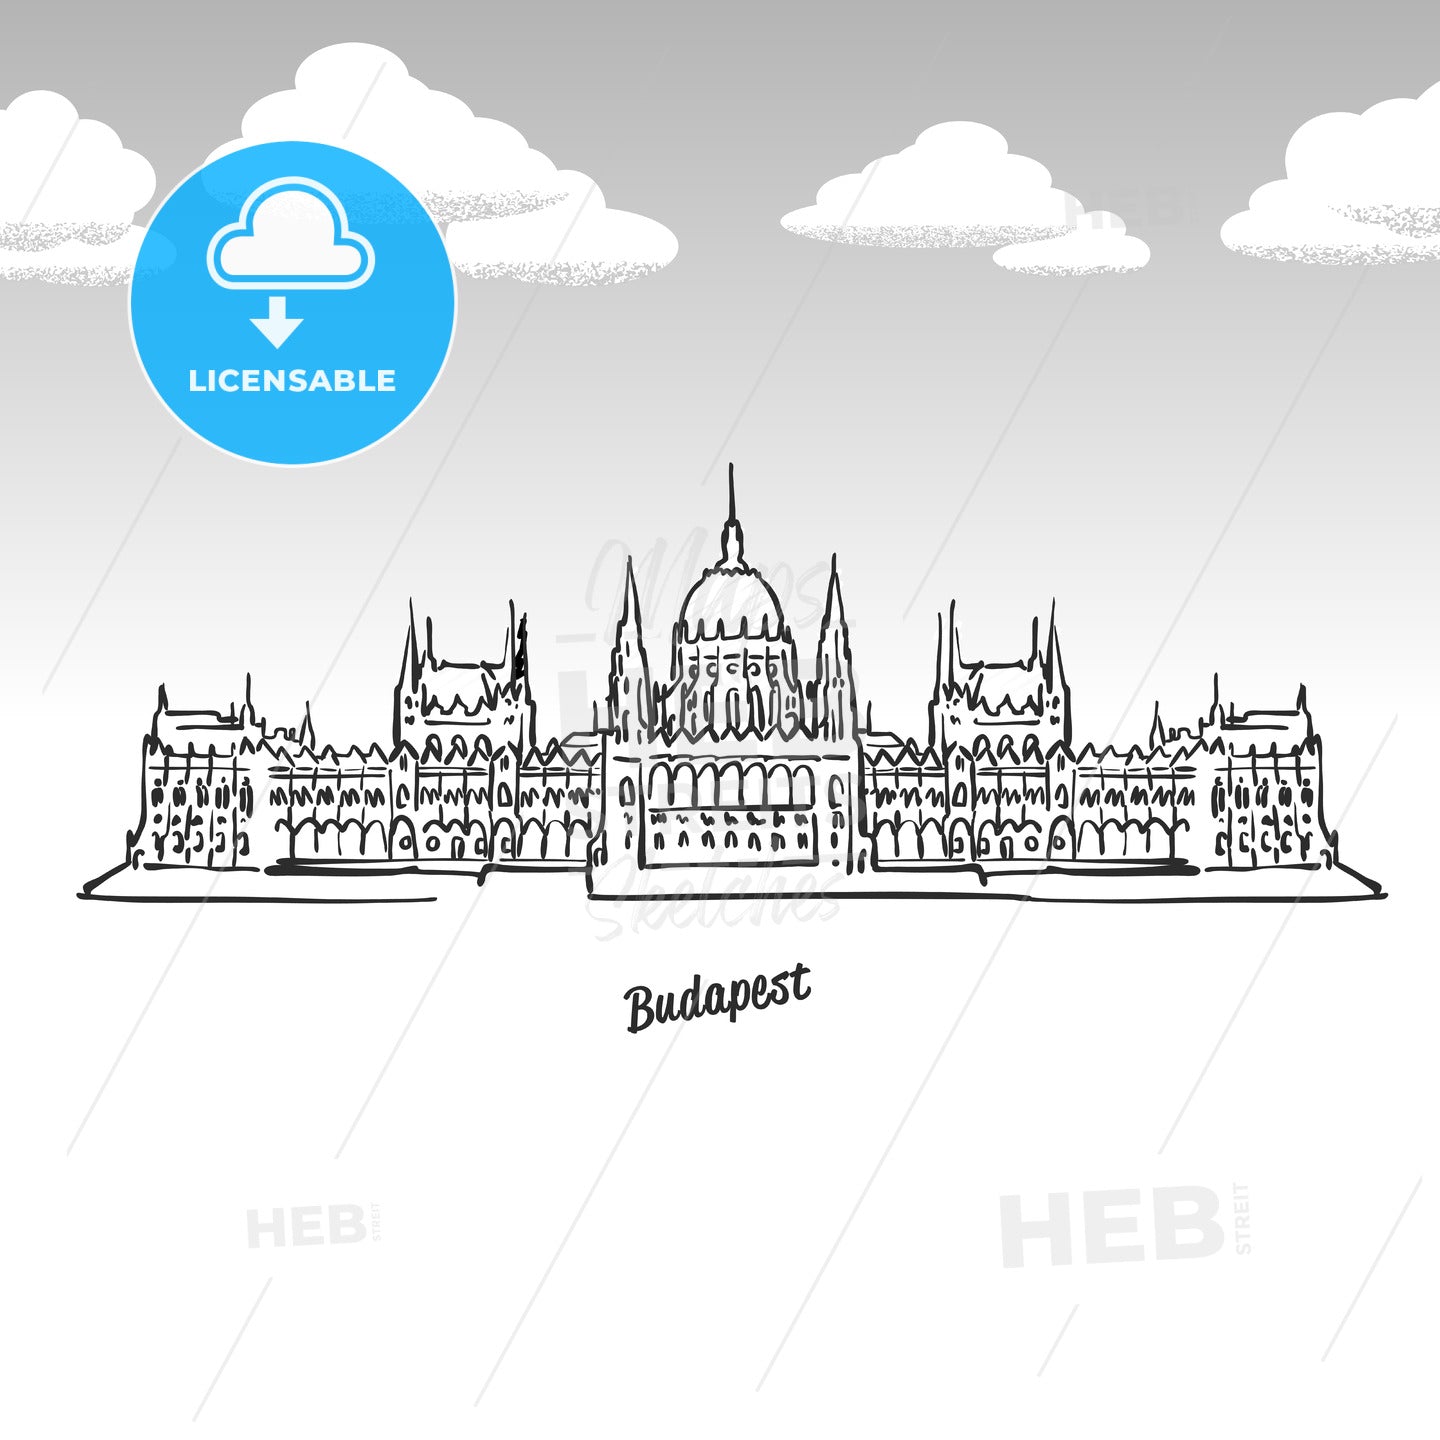 Budapest, Hungary famous landmark sketch – instant download